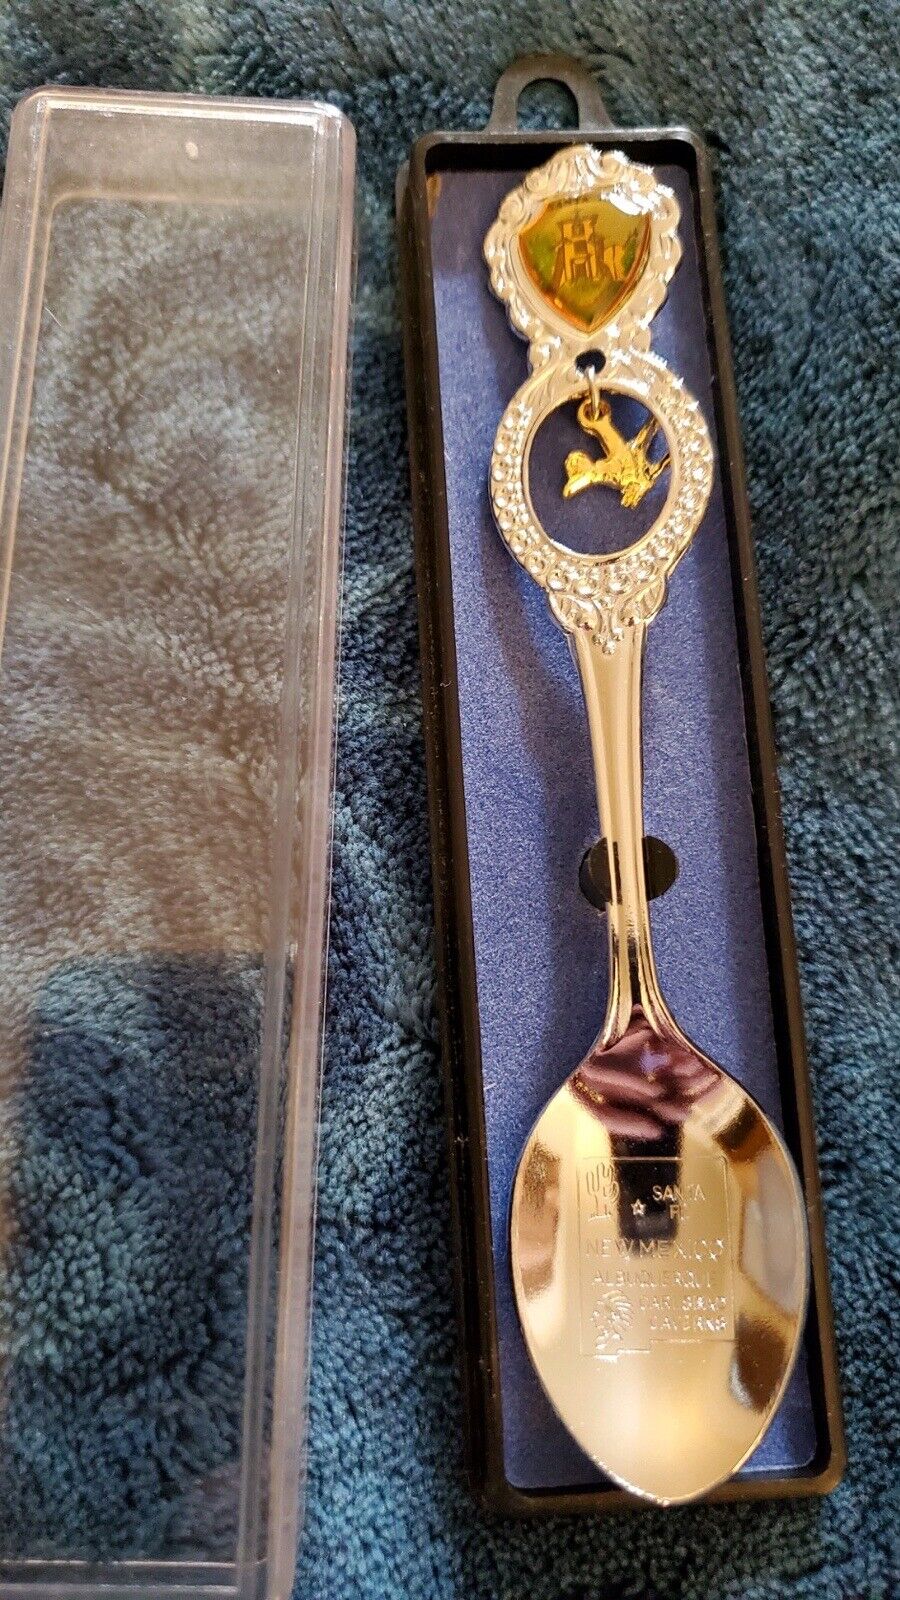 Vintage Souvenir Spoon US Collectible New Mexico Roadrunner and Carlsbad Caverns